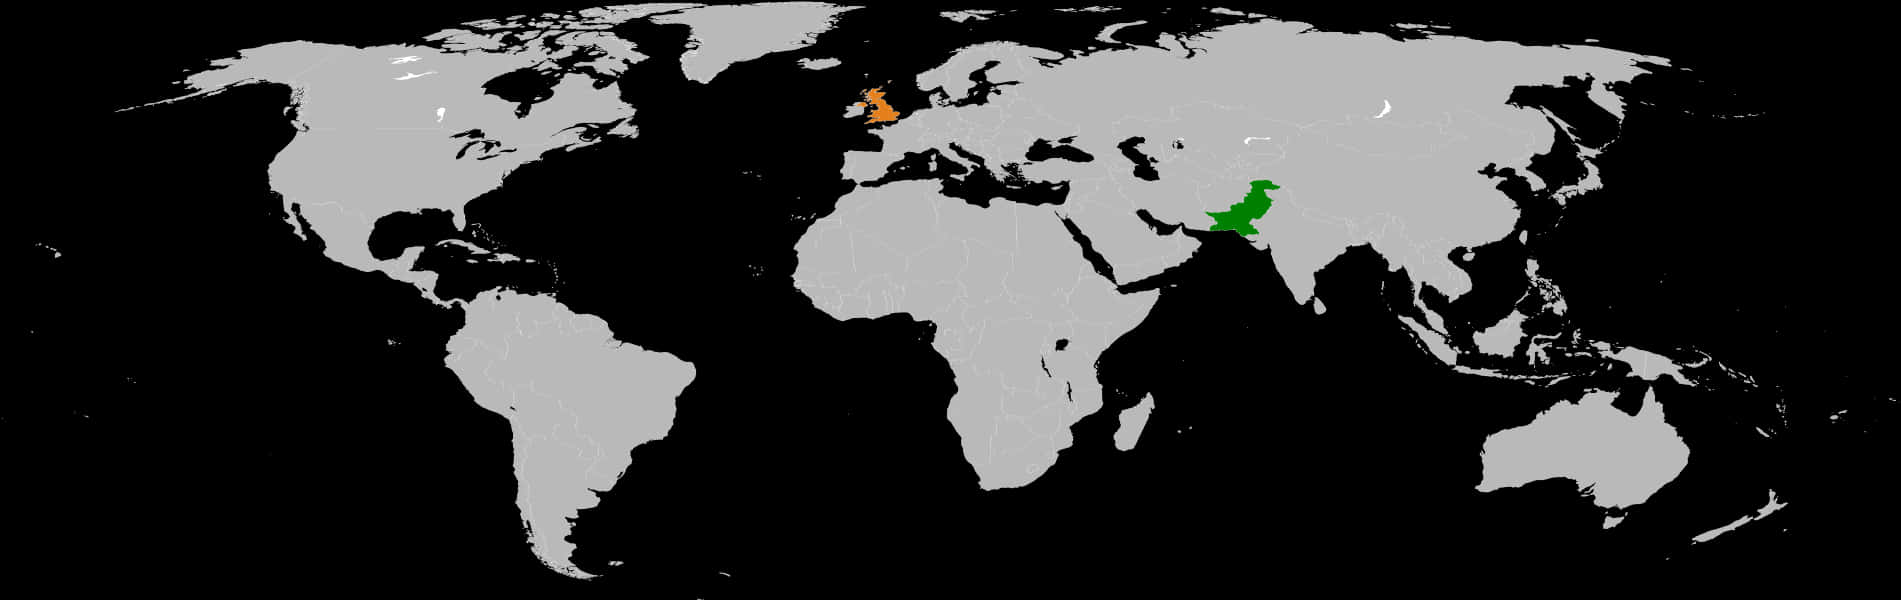 World Map Two Countries Highlighted